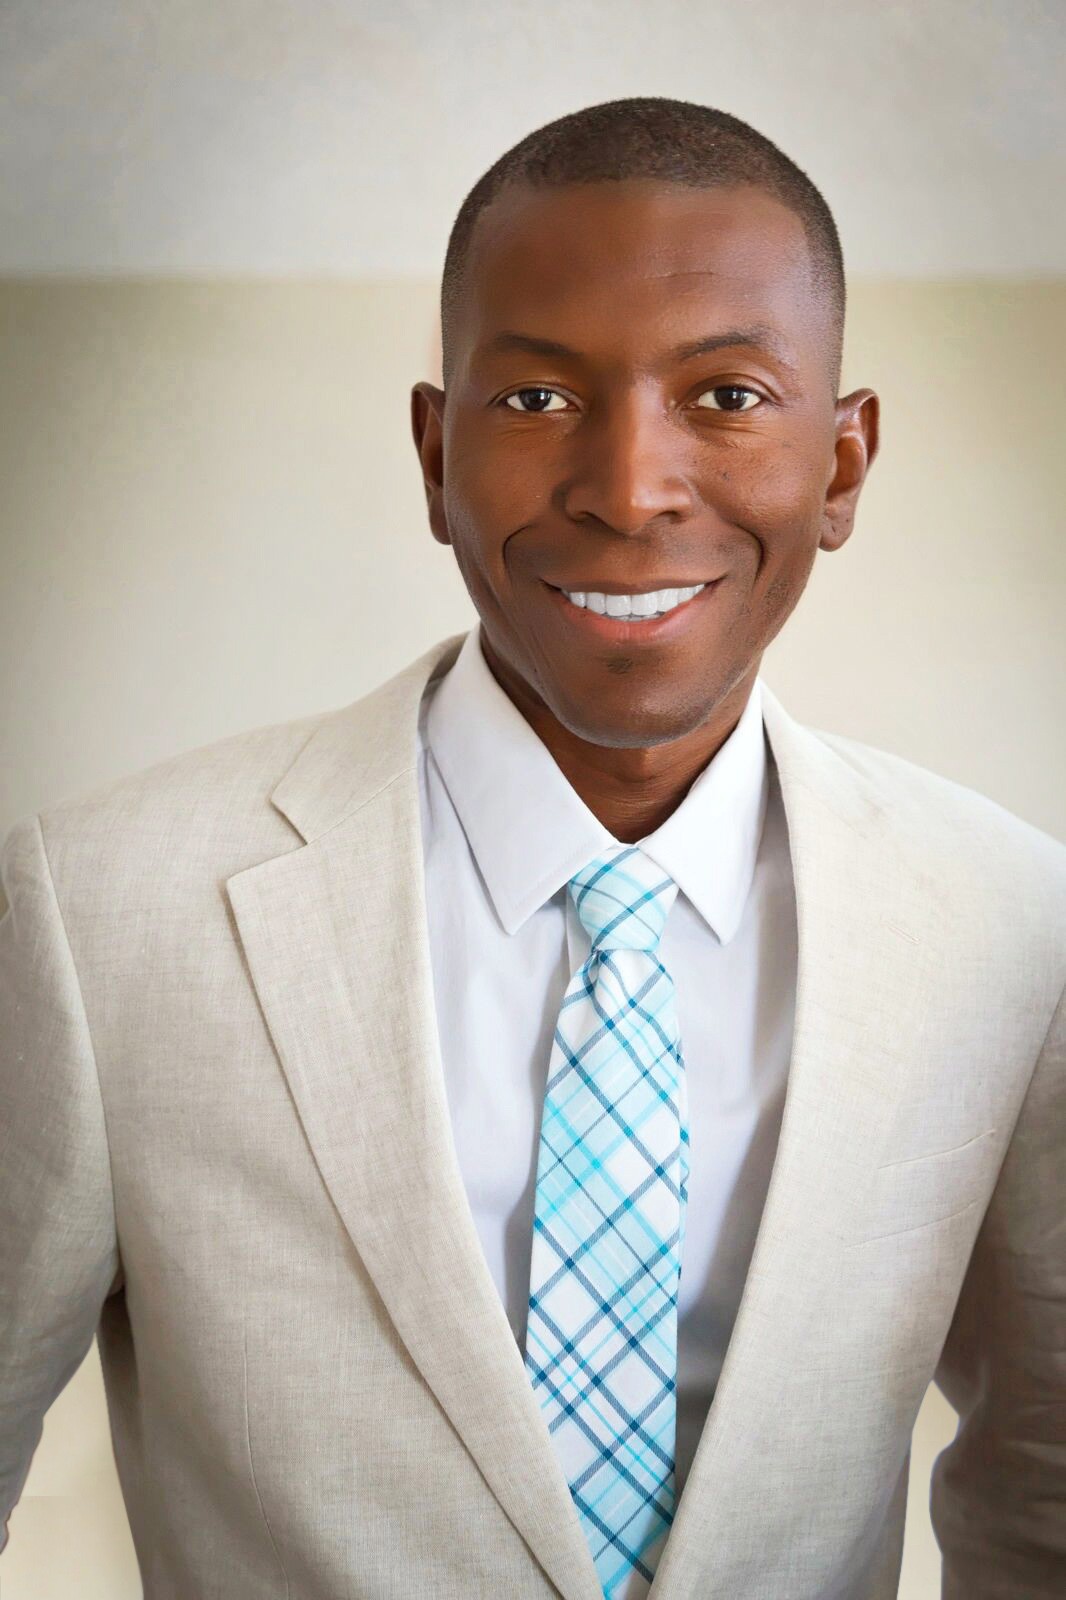 A black man in a cream suit with a royal blue plaid tie smiling and looking at the camera.